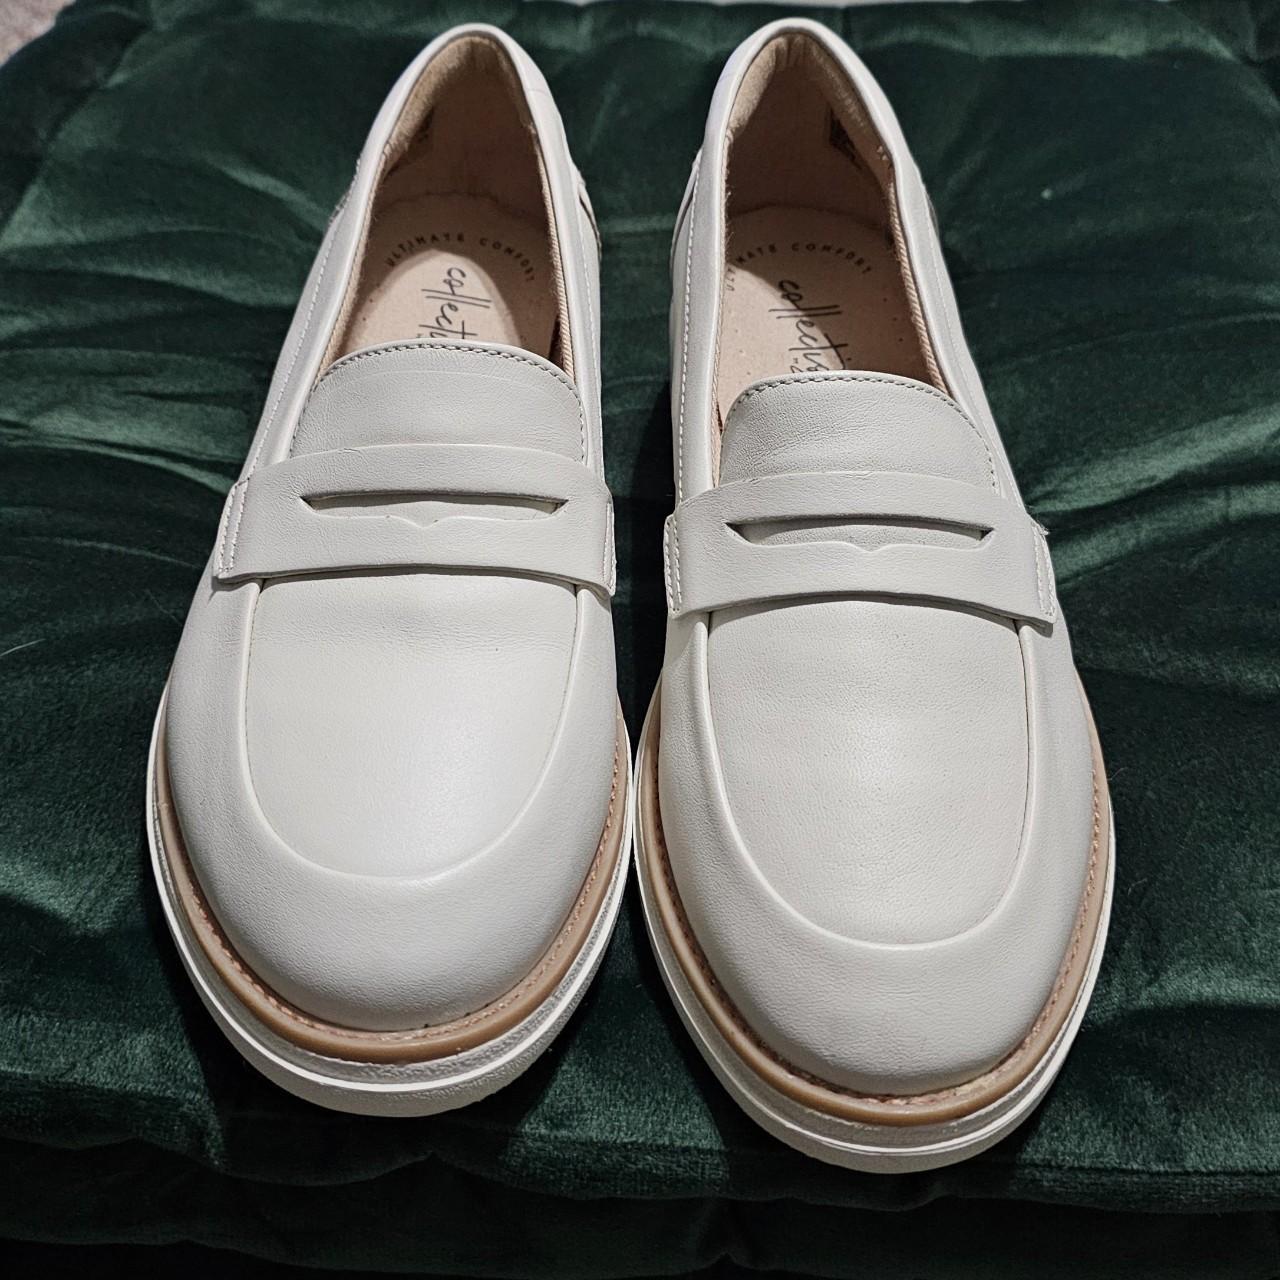 Clarks Women's White Loafers